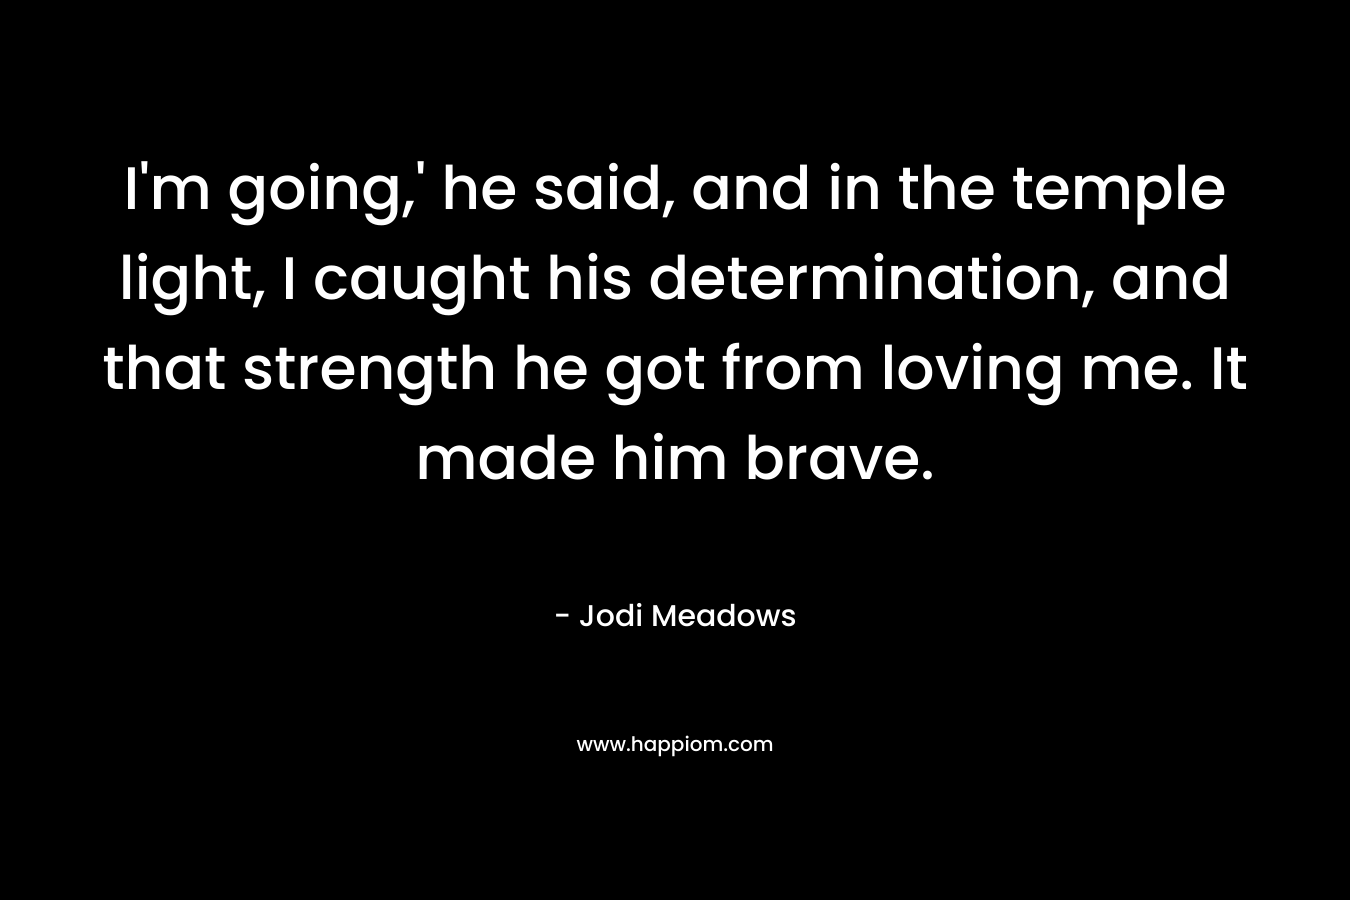 I’m going,’ he said, and in the temple light, I caught his determination, and that strength he got from loving me. It made him brave. – Jodi Meadows